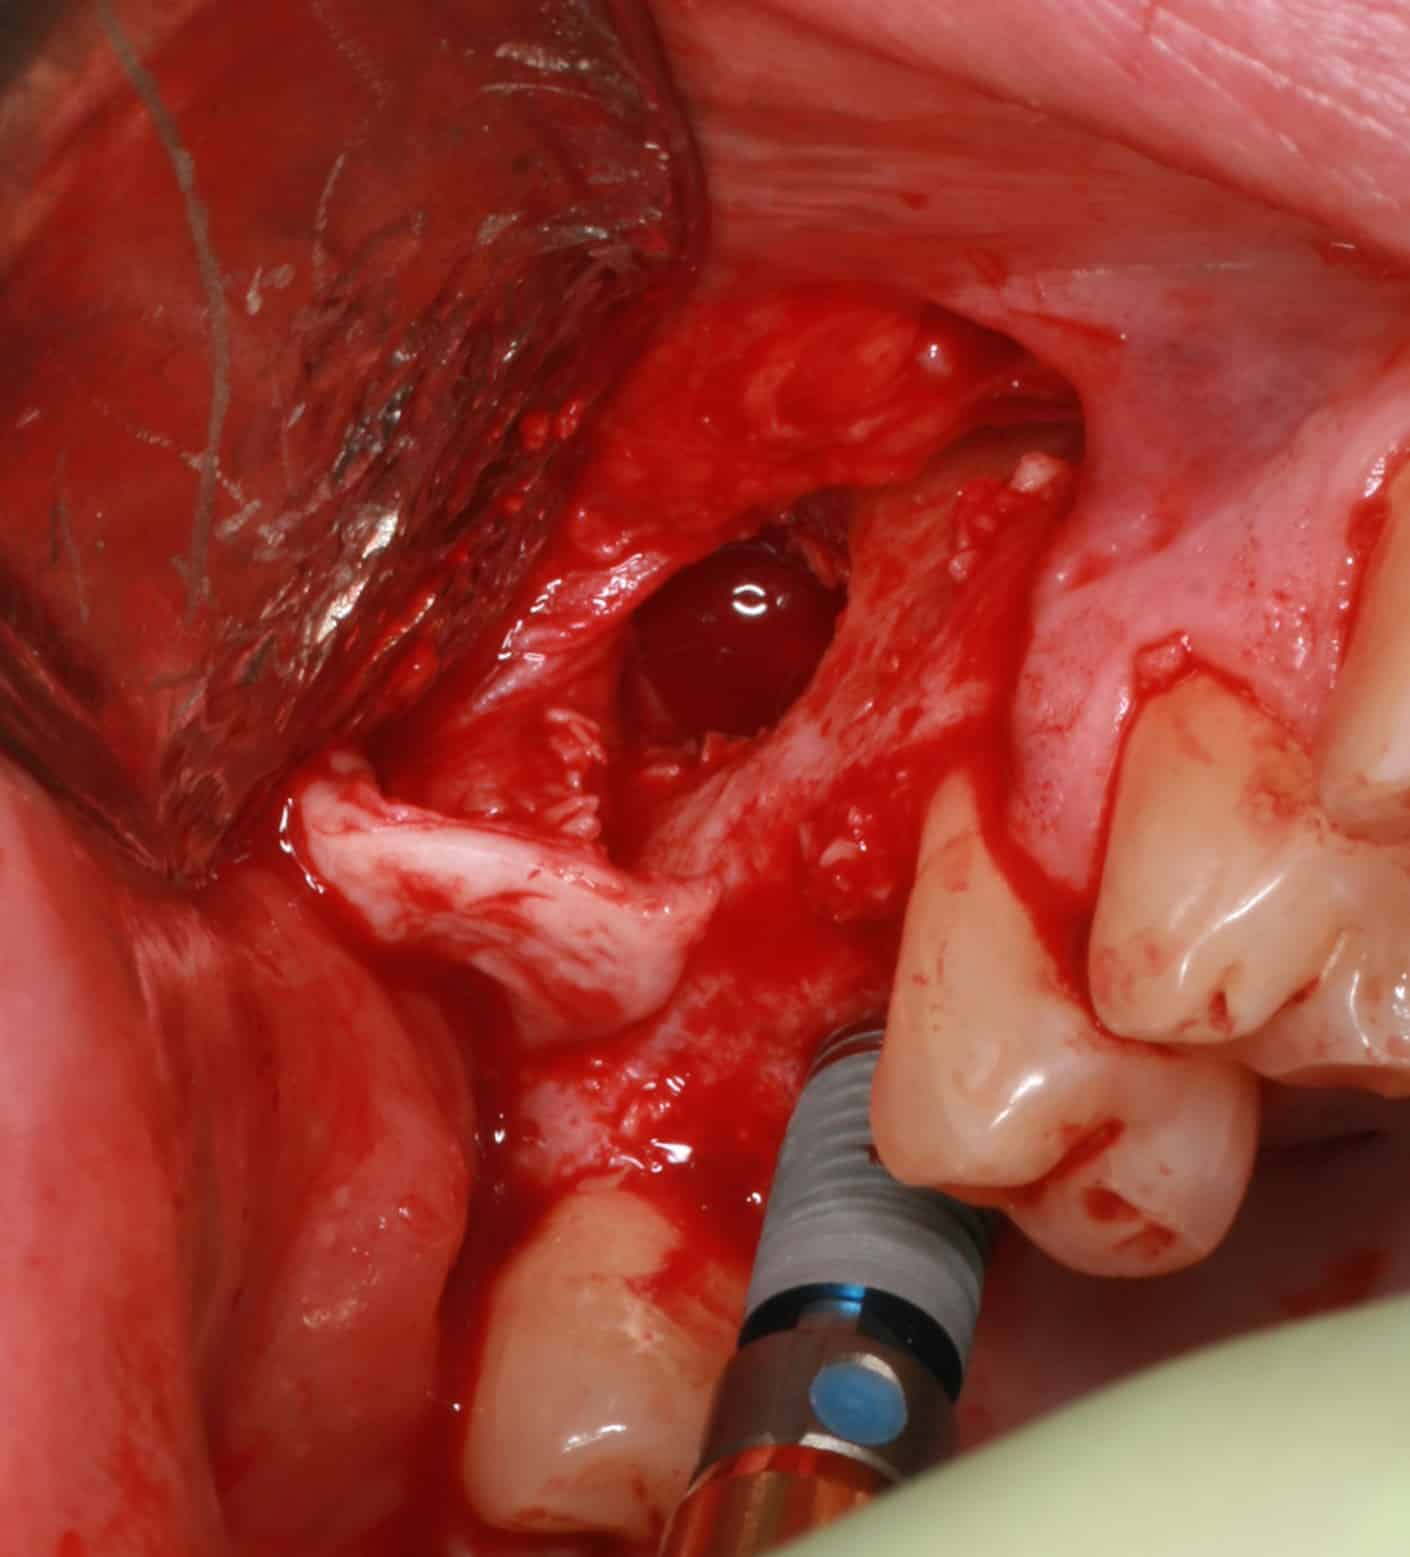 sinus lift with implant